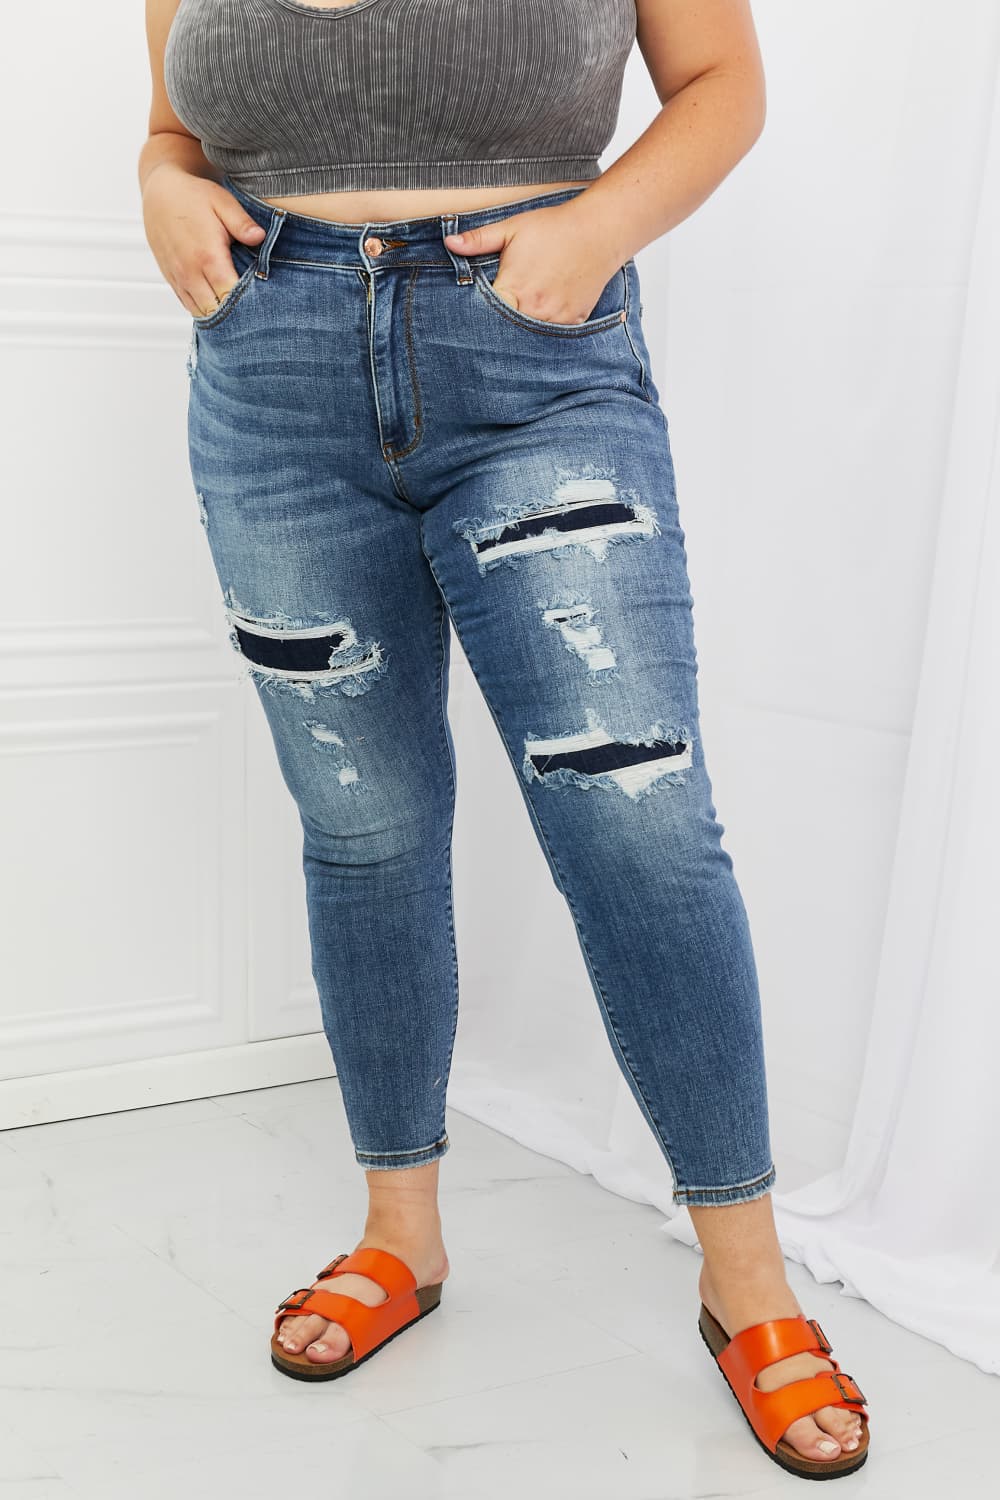 Plus Size, Judy Blue, Mid Rise Navy Blue Patched Destroy Relaxed Jeans